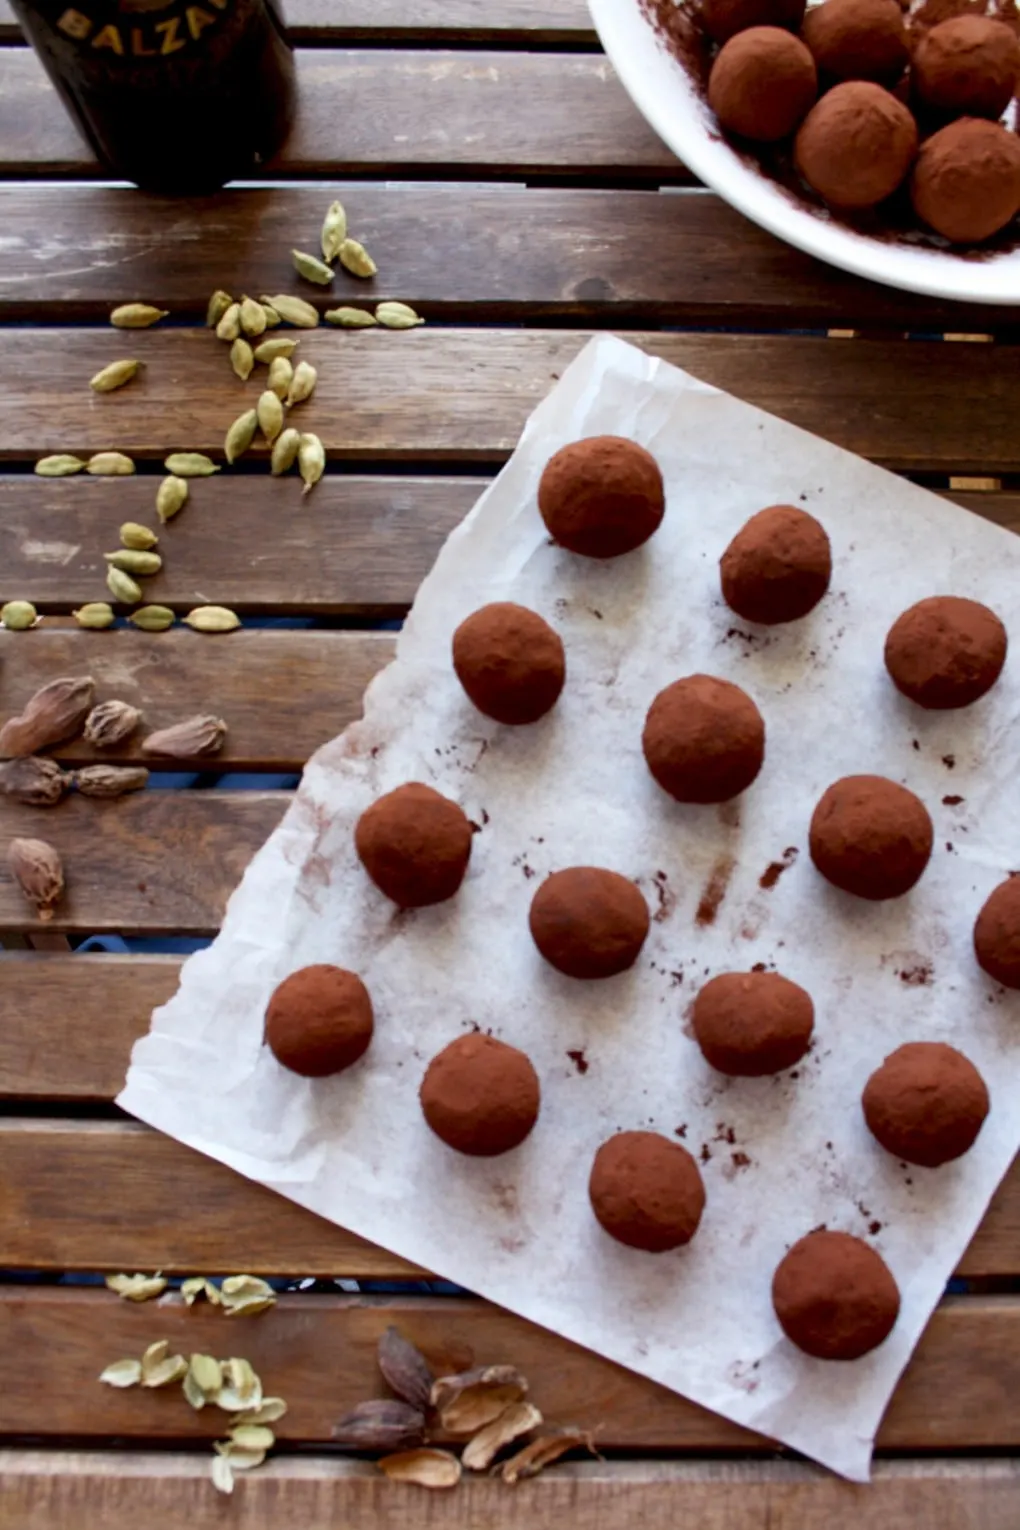 Three Chocolate Truffles Recipes - First Recipe Before Being Packed and Turned into a Perfect Present